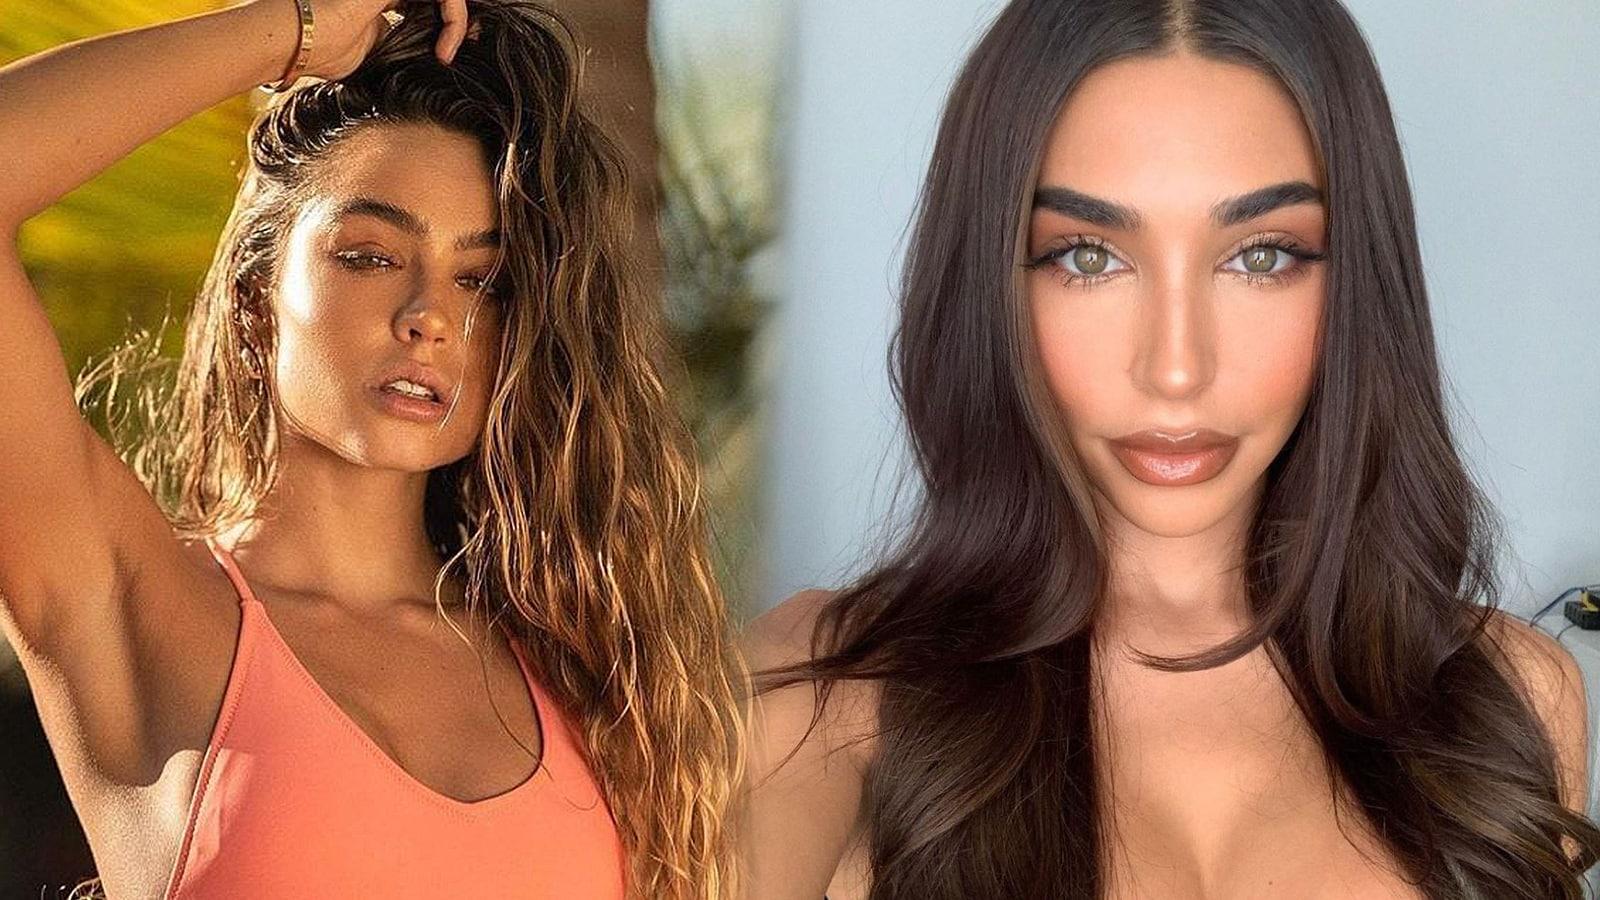 Sommer Ray and Chantel Jeffries pose for the camera.